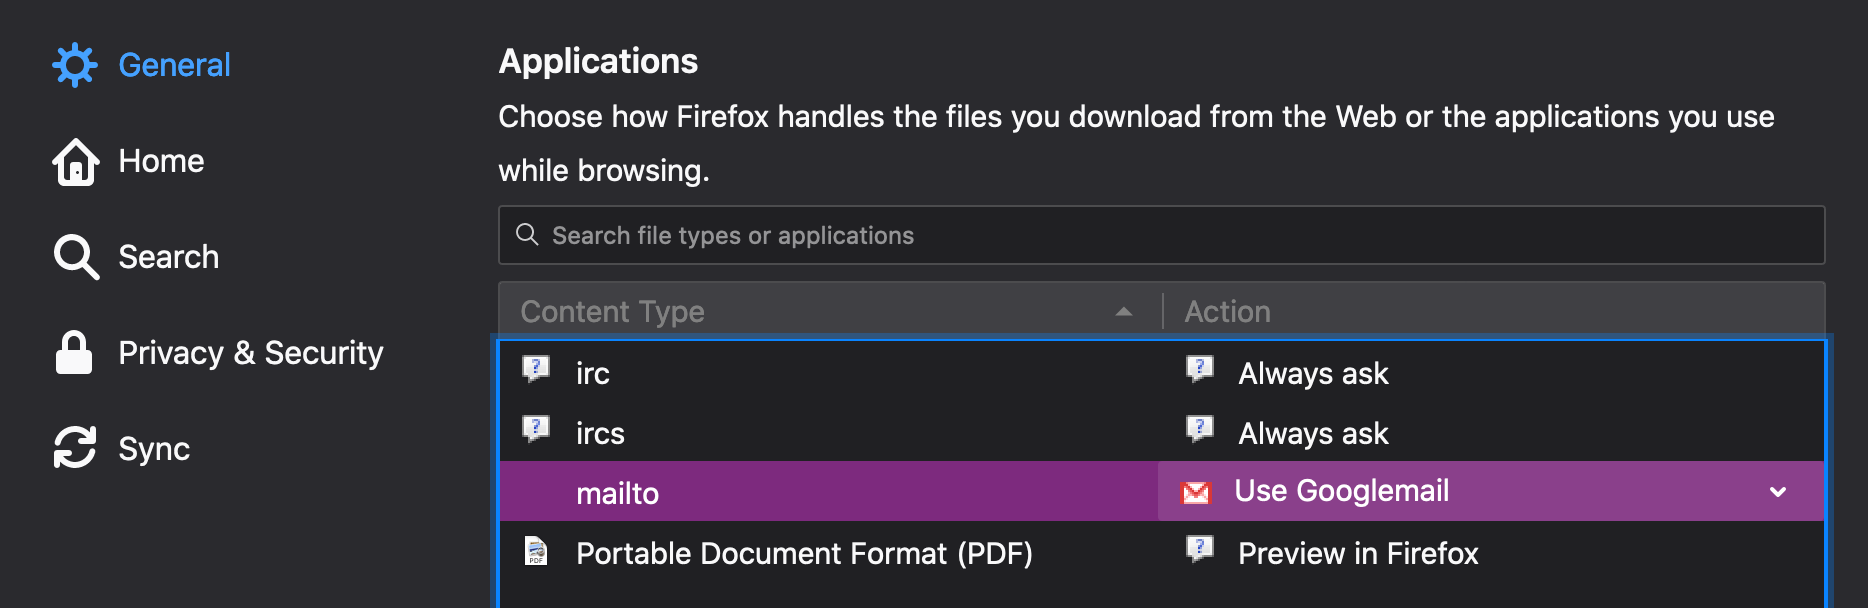 create firefox email account